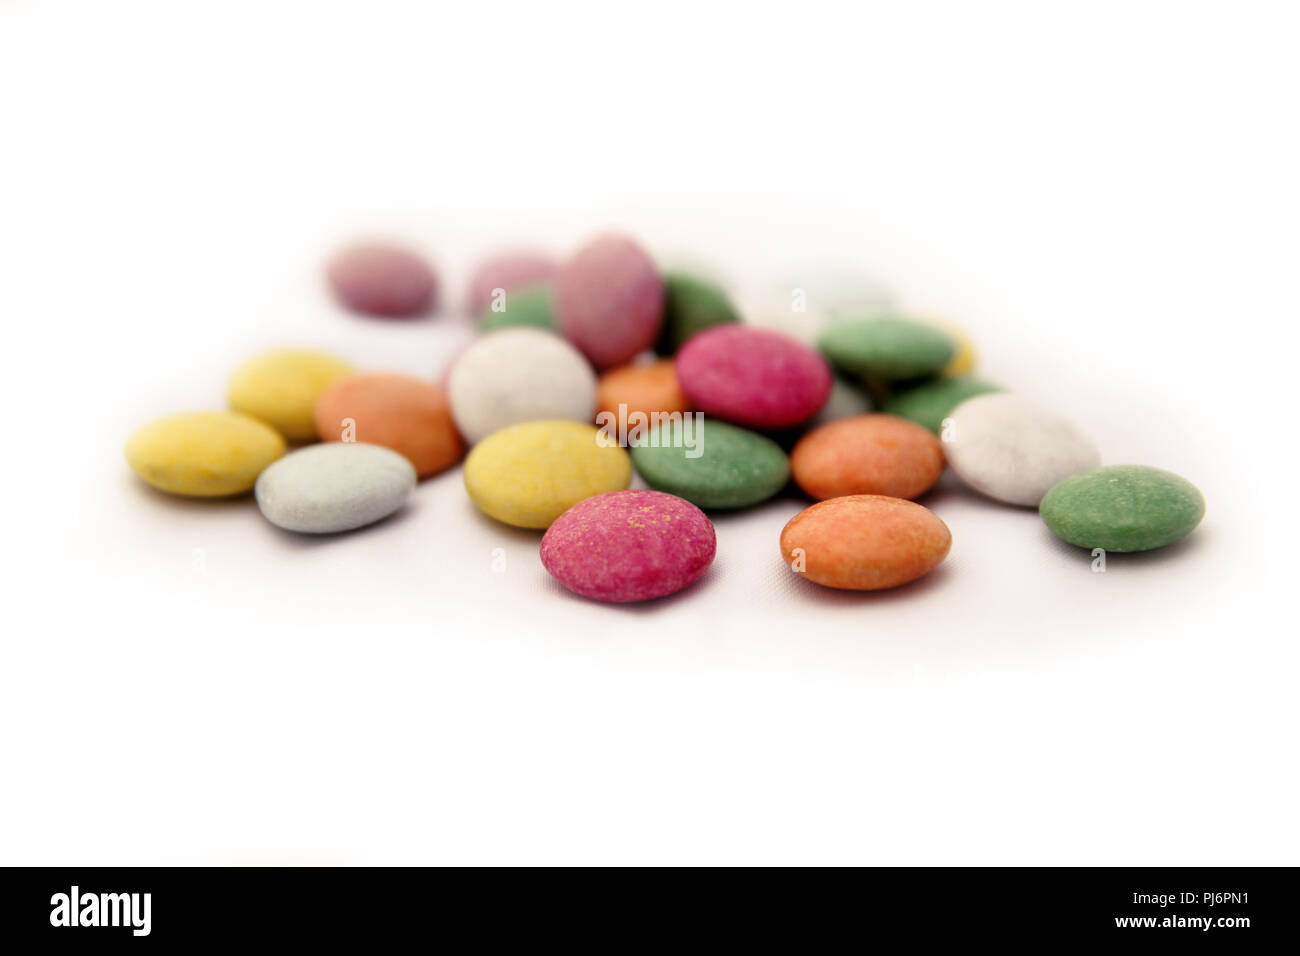 Colored candy. Multicolored colorful candy with white background closeup. Colorful chocolate button candies spread randomly on white background. Stock Photo